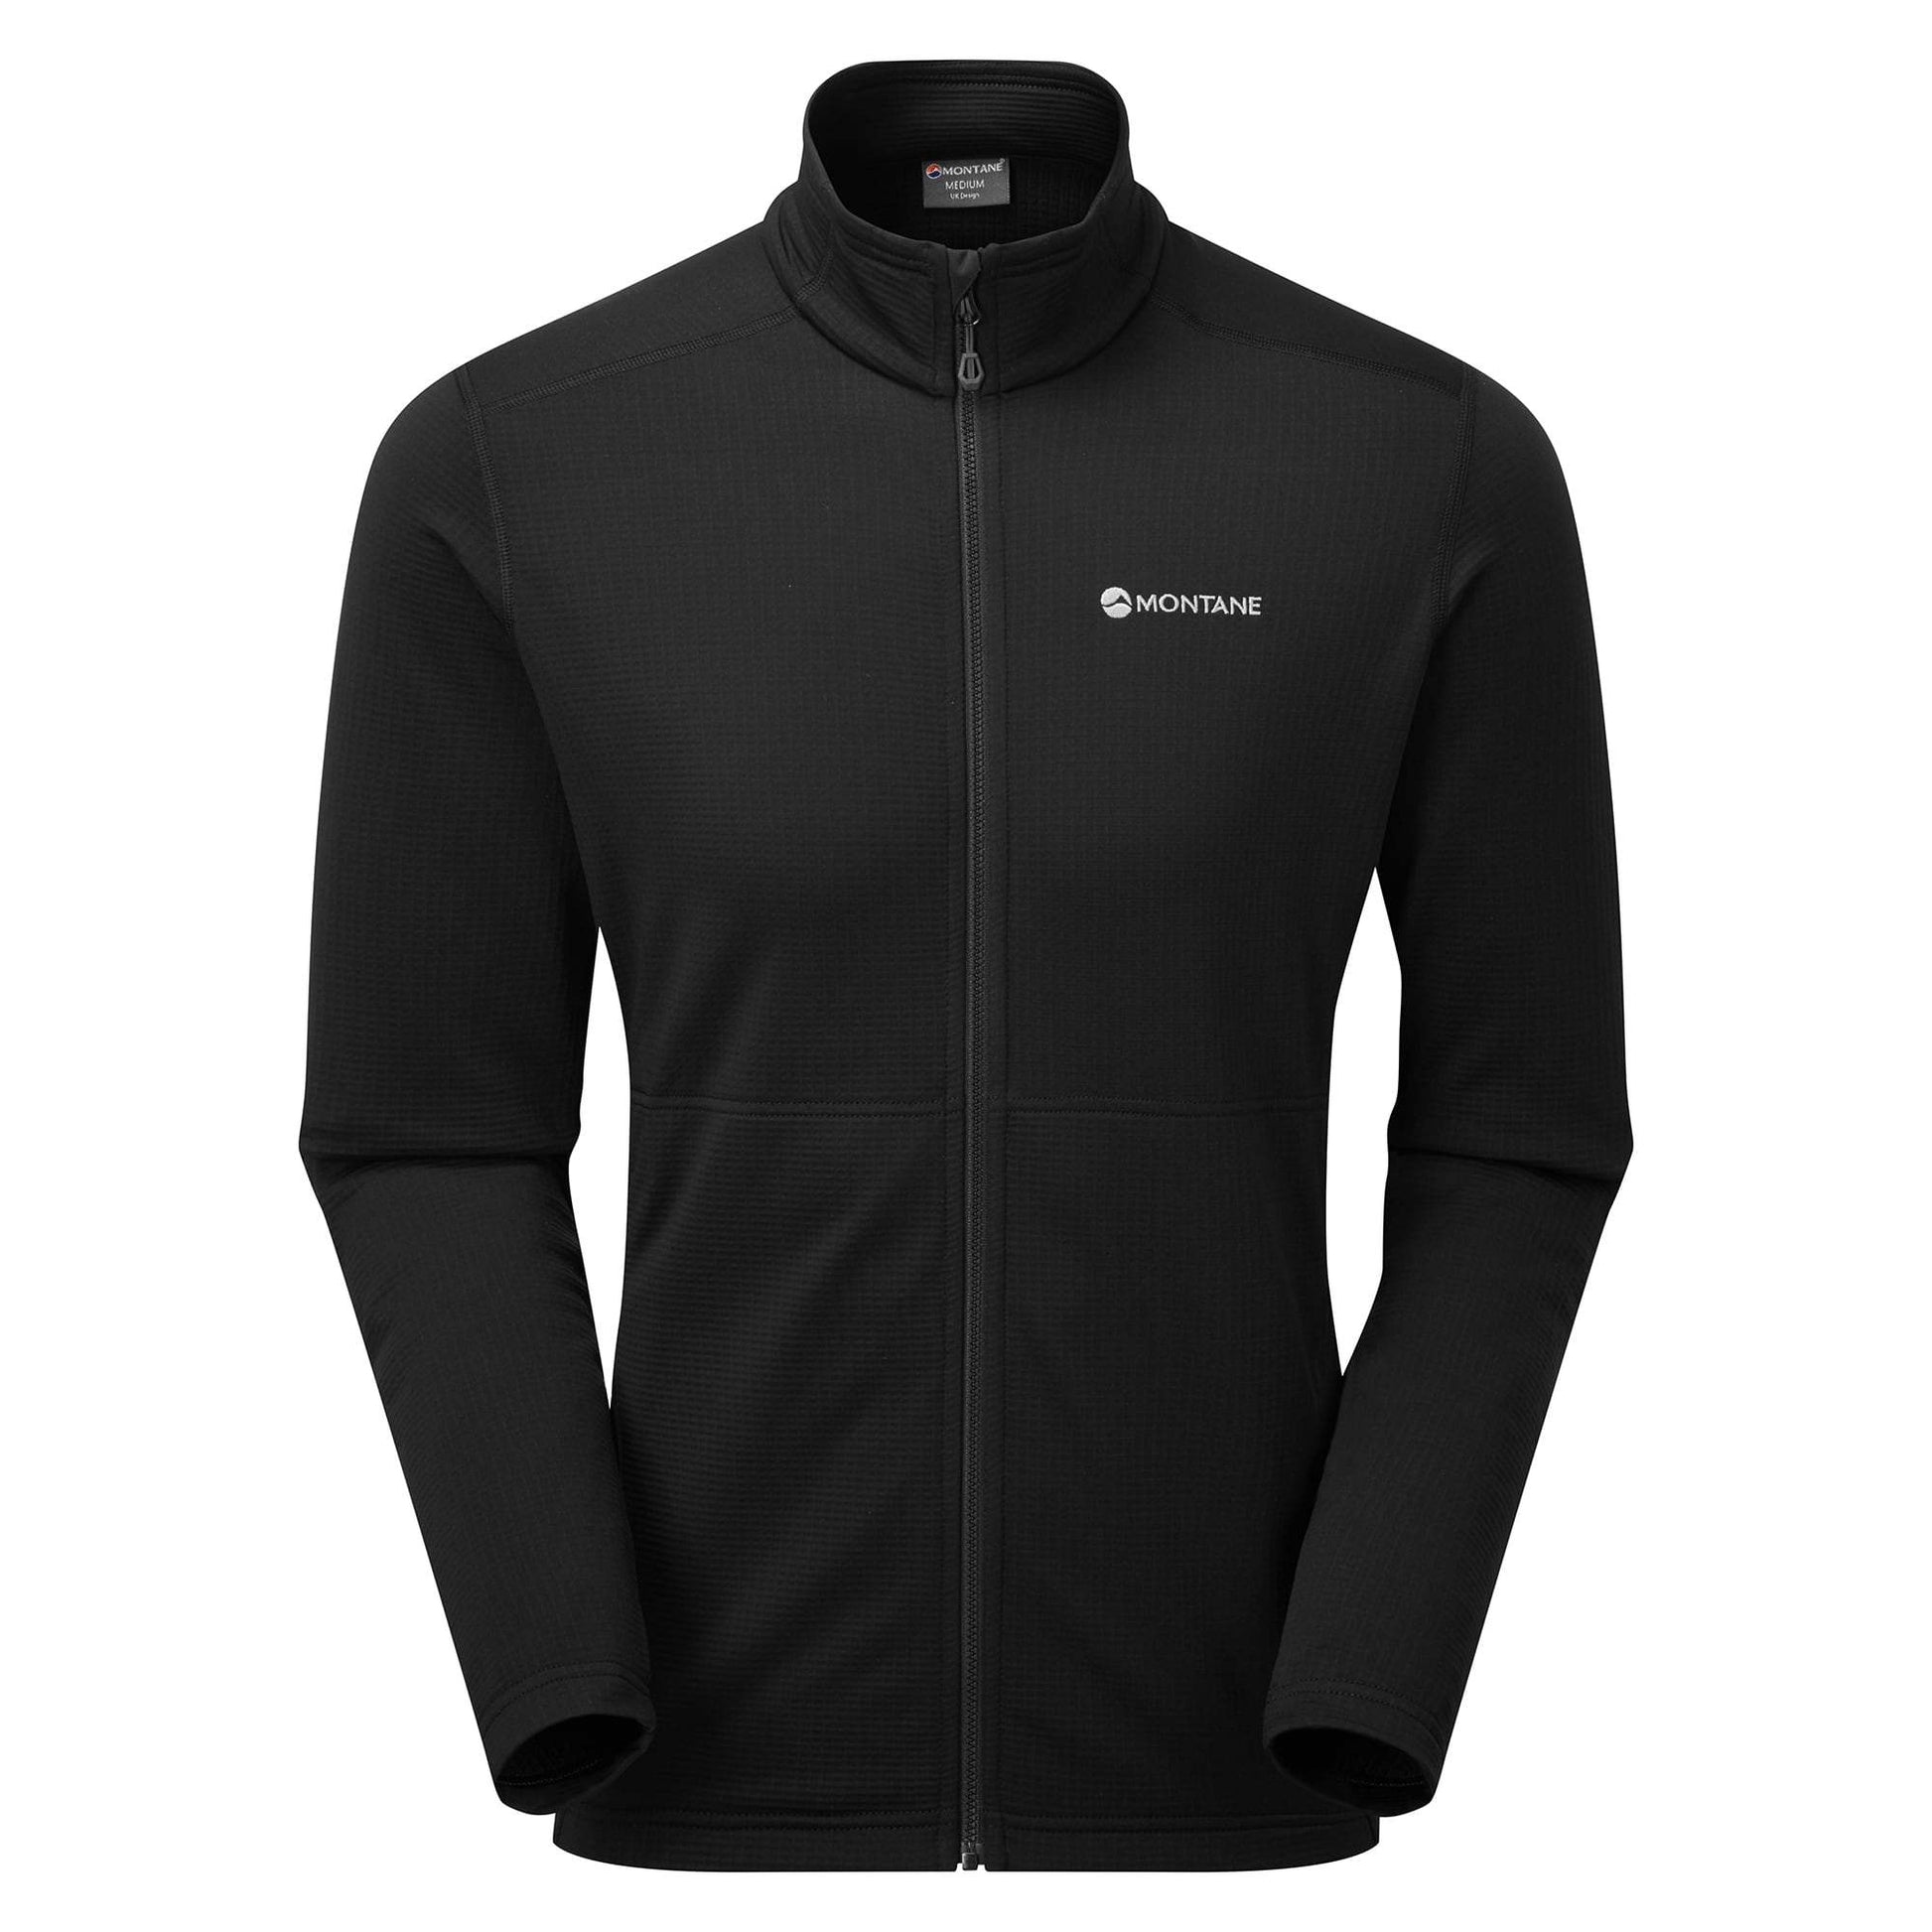 Protium Fleece Jacket by Montane - The Luxury Promotional Gifts Company Limited